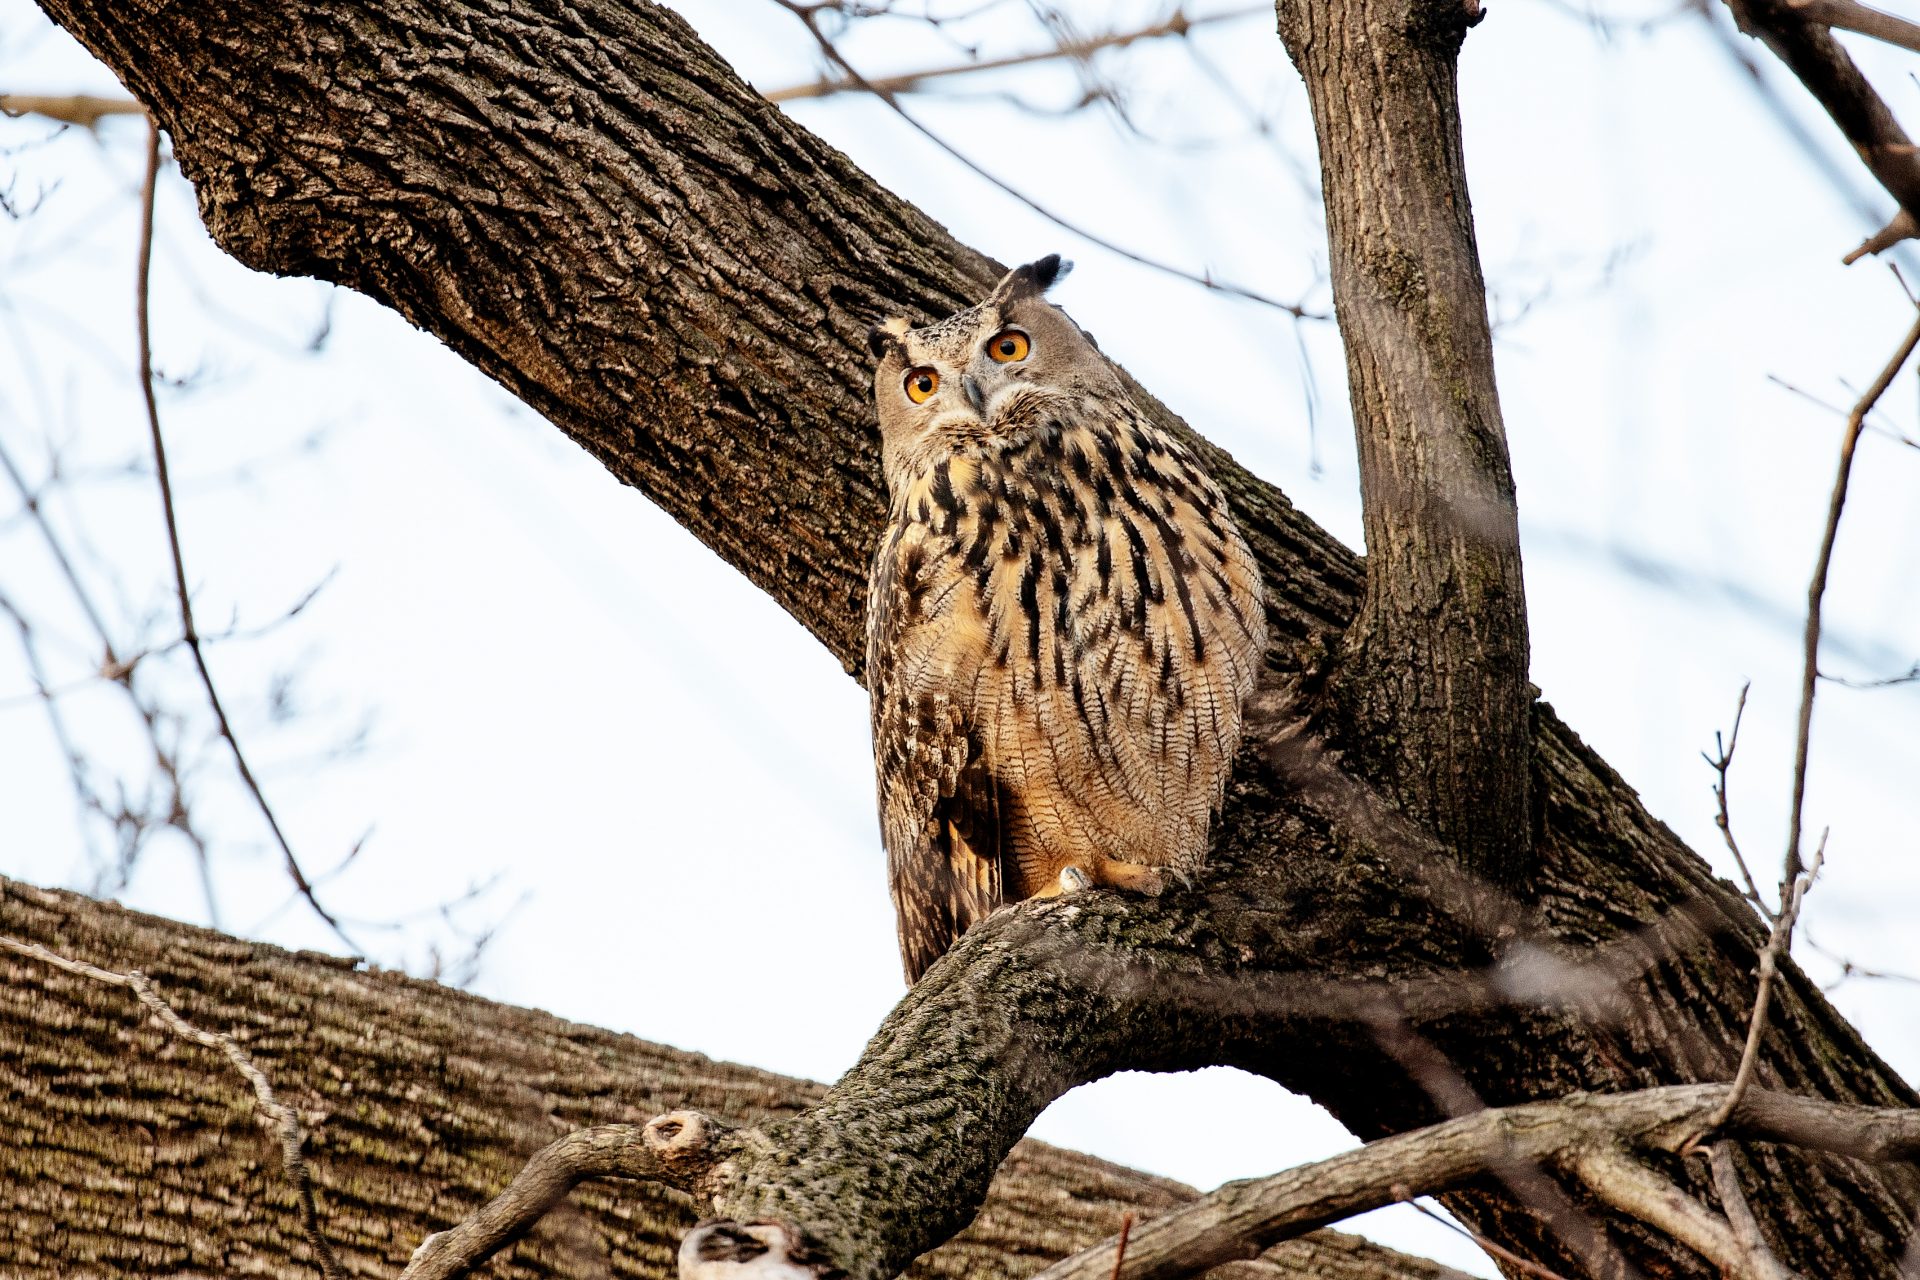 Flaco, the owl that escaped from Central Park Zoo, died after a year of freedom